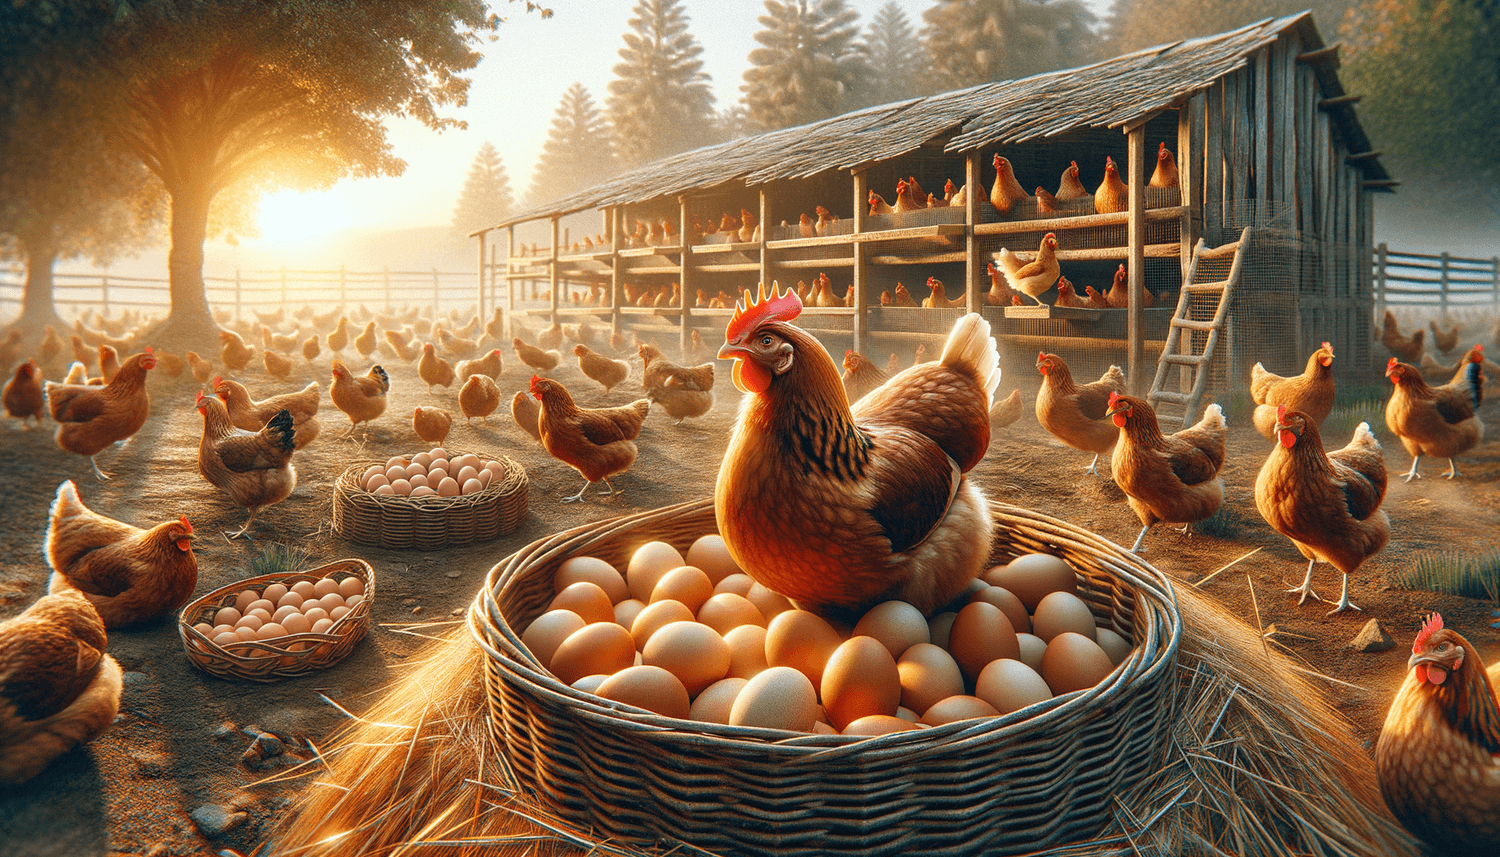 How Long Do Chickens Lay Eggs?